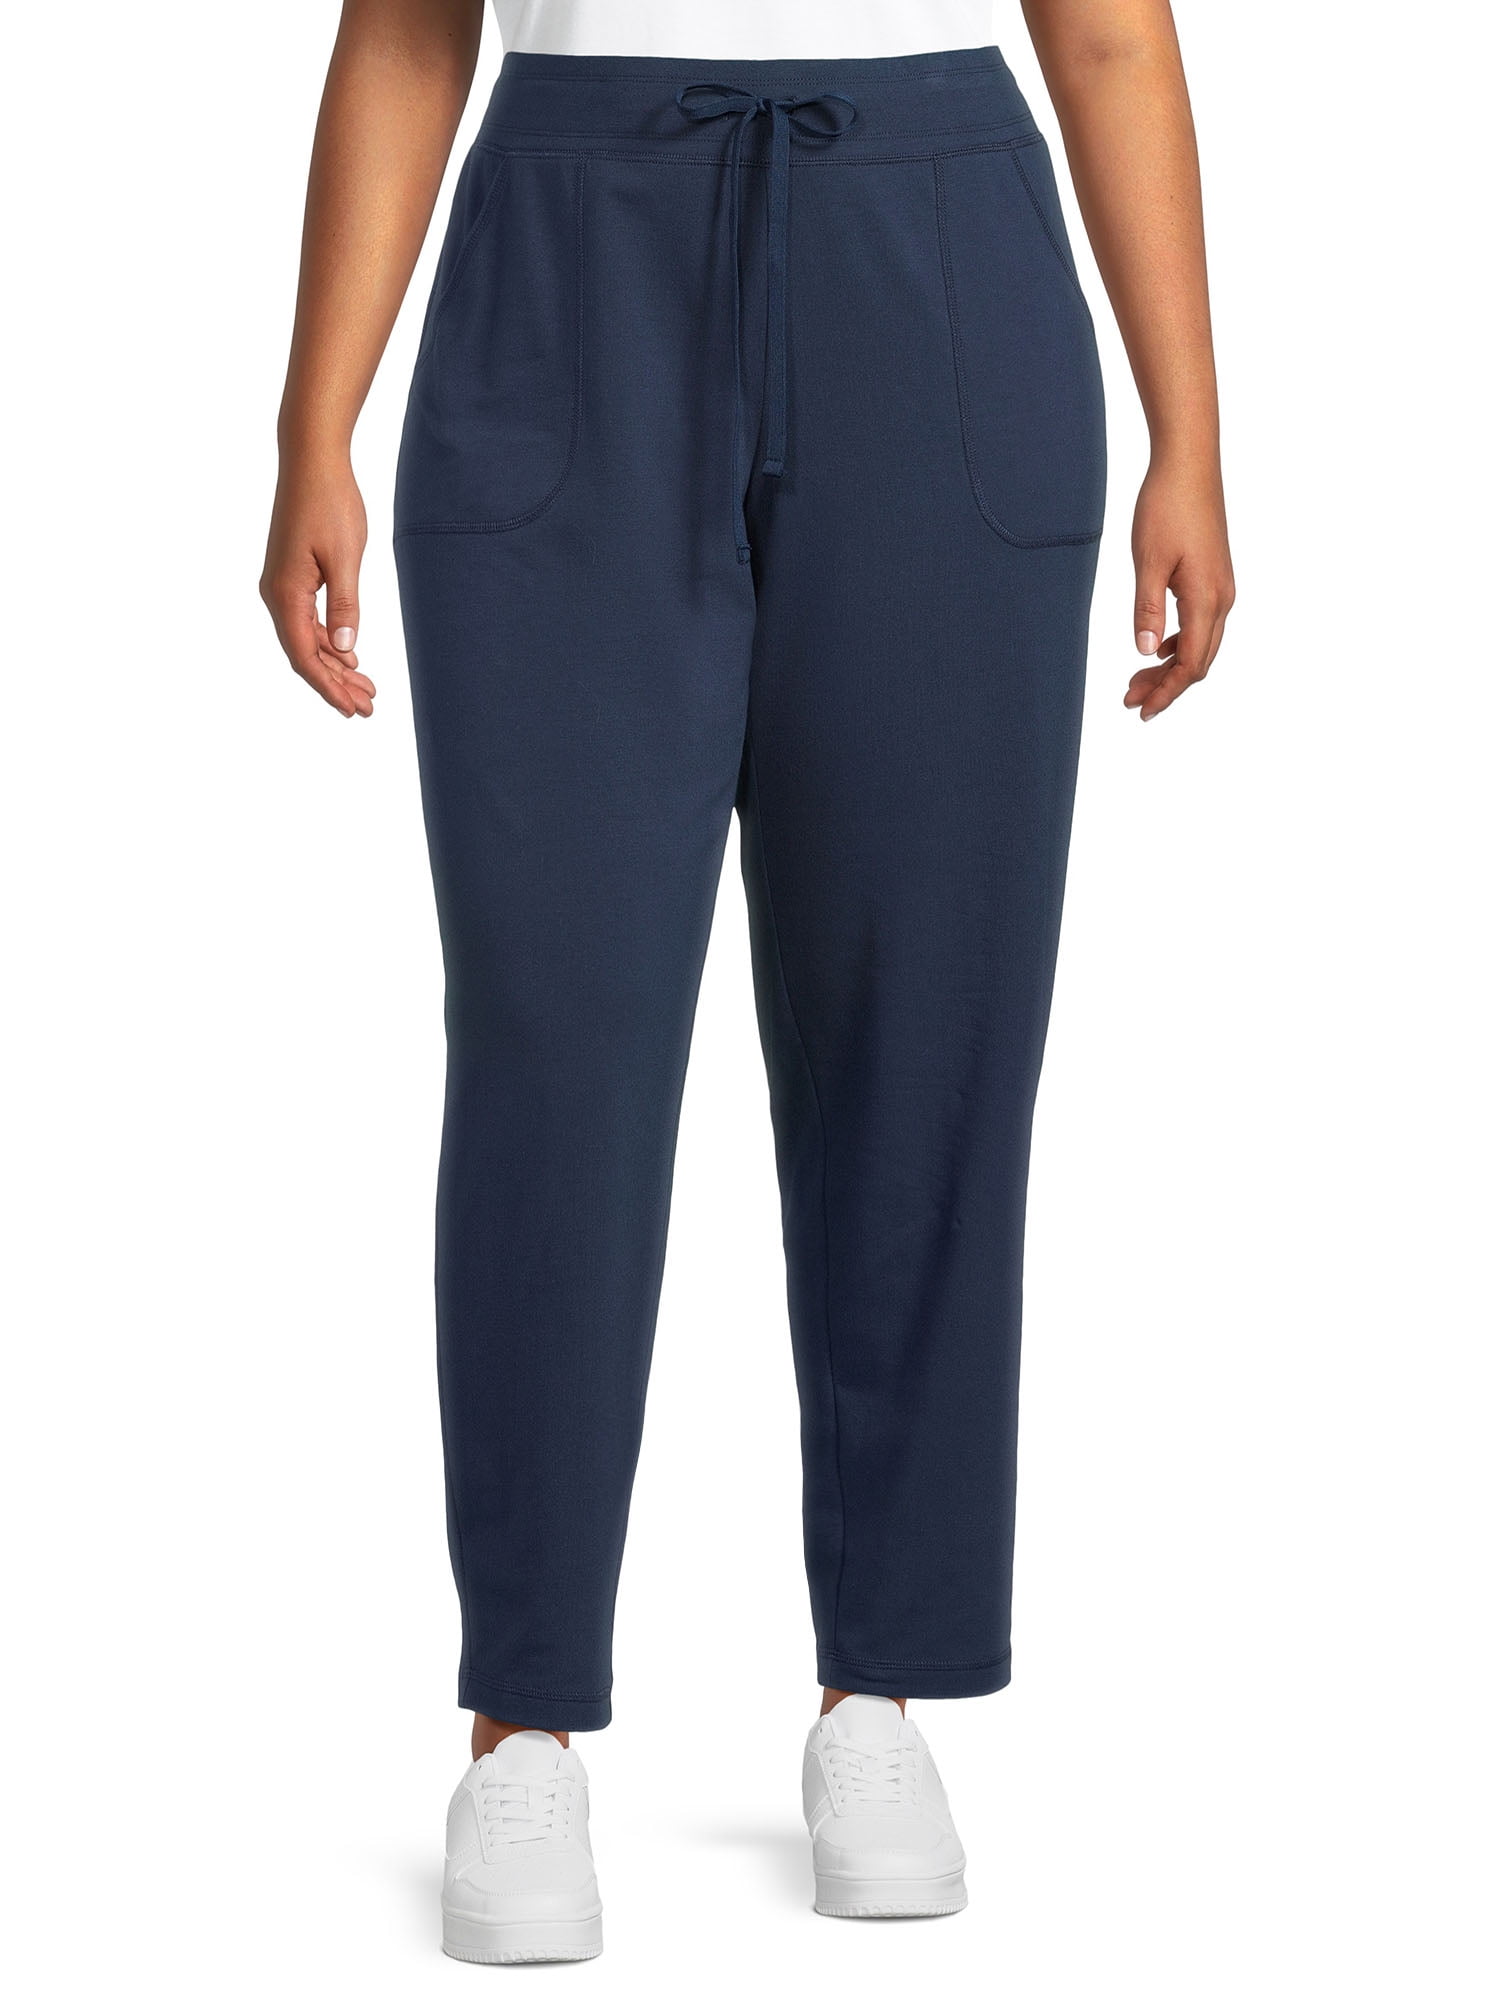 Athletic Works Women's Plus Size Pull-On Knit Pants, 30” Inseam ...